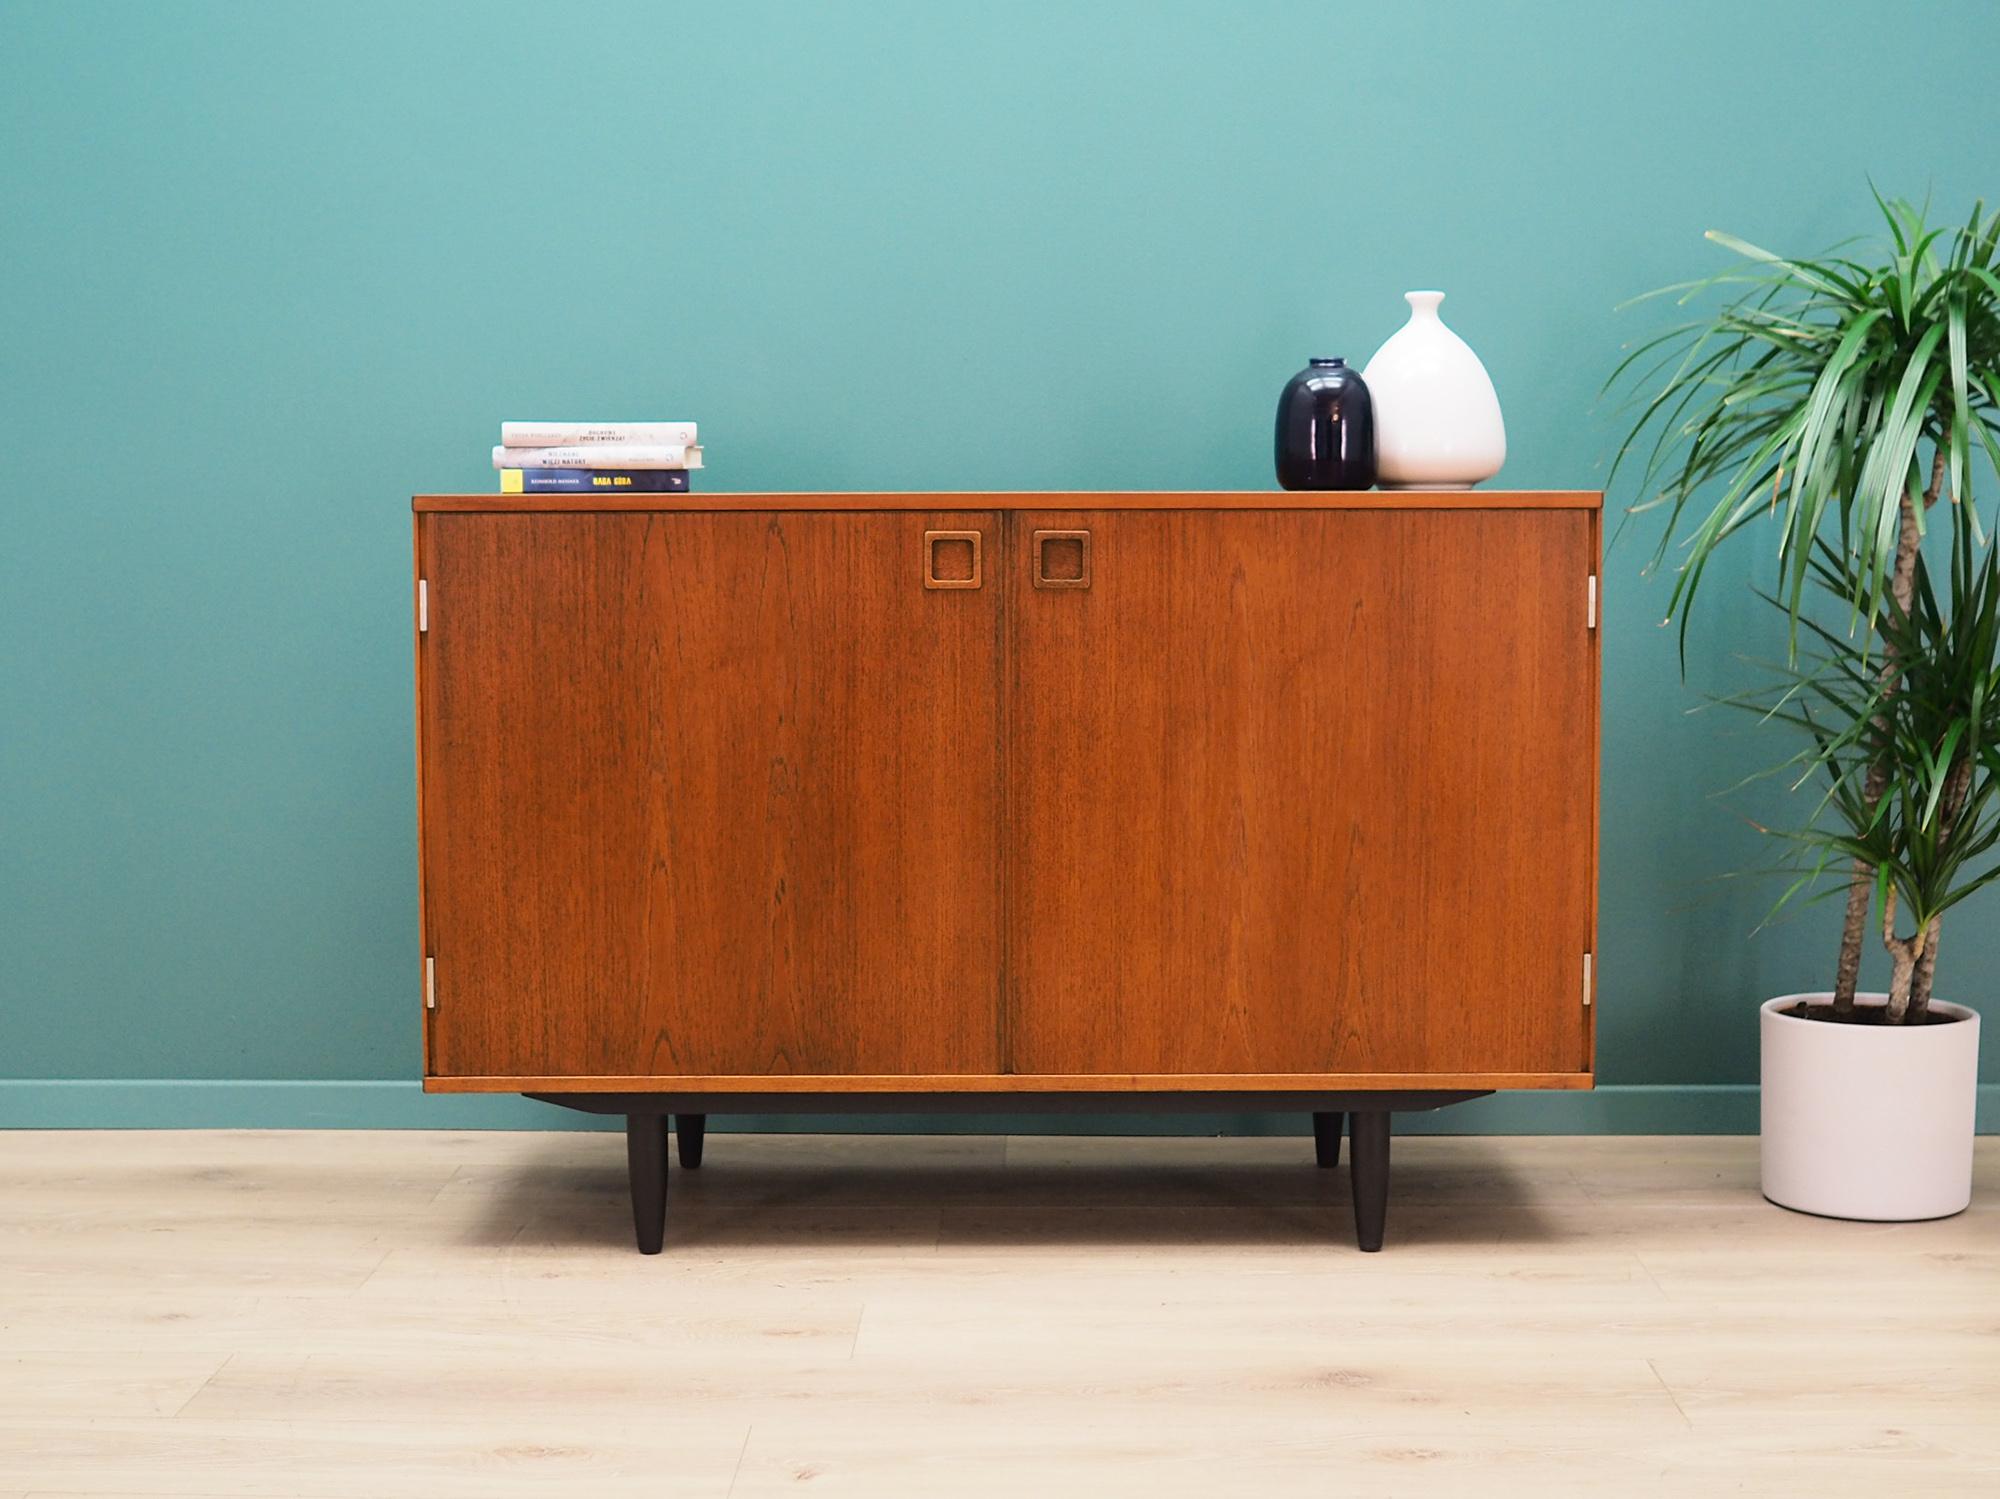 Cabinet was made in the 1960s, designed by an icon of Danish design Peter Løvig Nielsen.

The construction is covered with teak veneer. The legs are made of solid wood and stained black. Surface after refreshing. Inside, the space has been filled